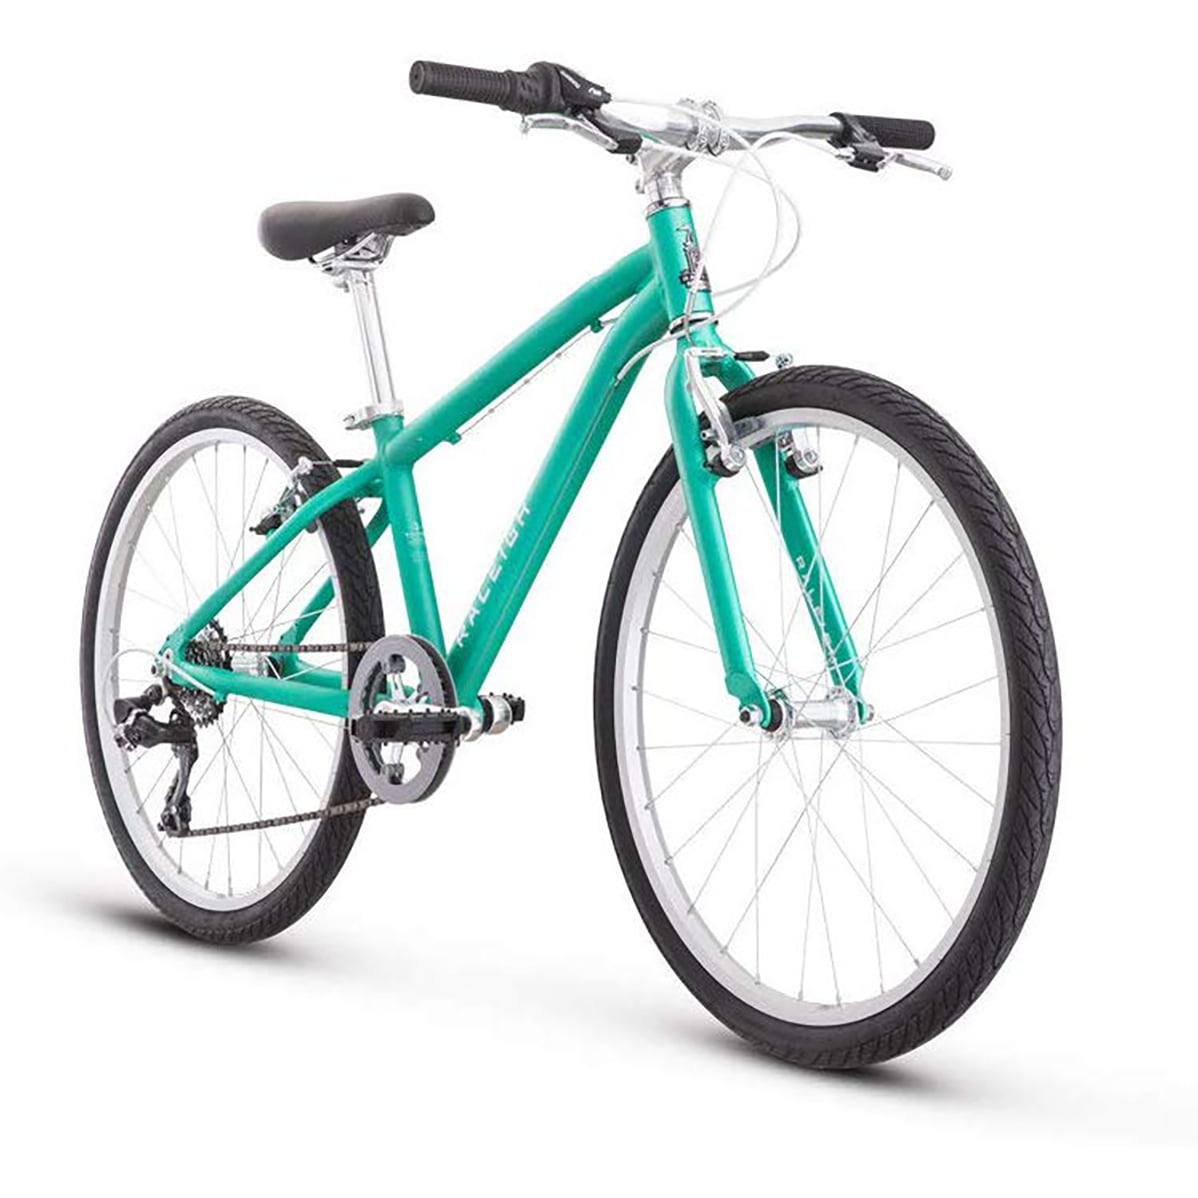 Raleigh Bicycle Alysa 24 In., Kids Flat Bar Road Bicycle for 8-12 Year Olds, Teal